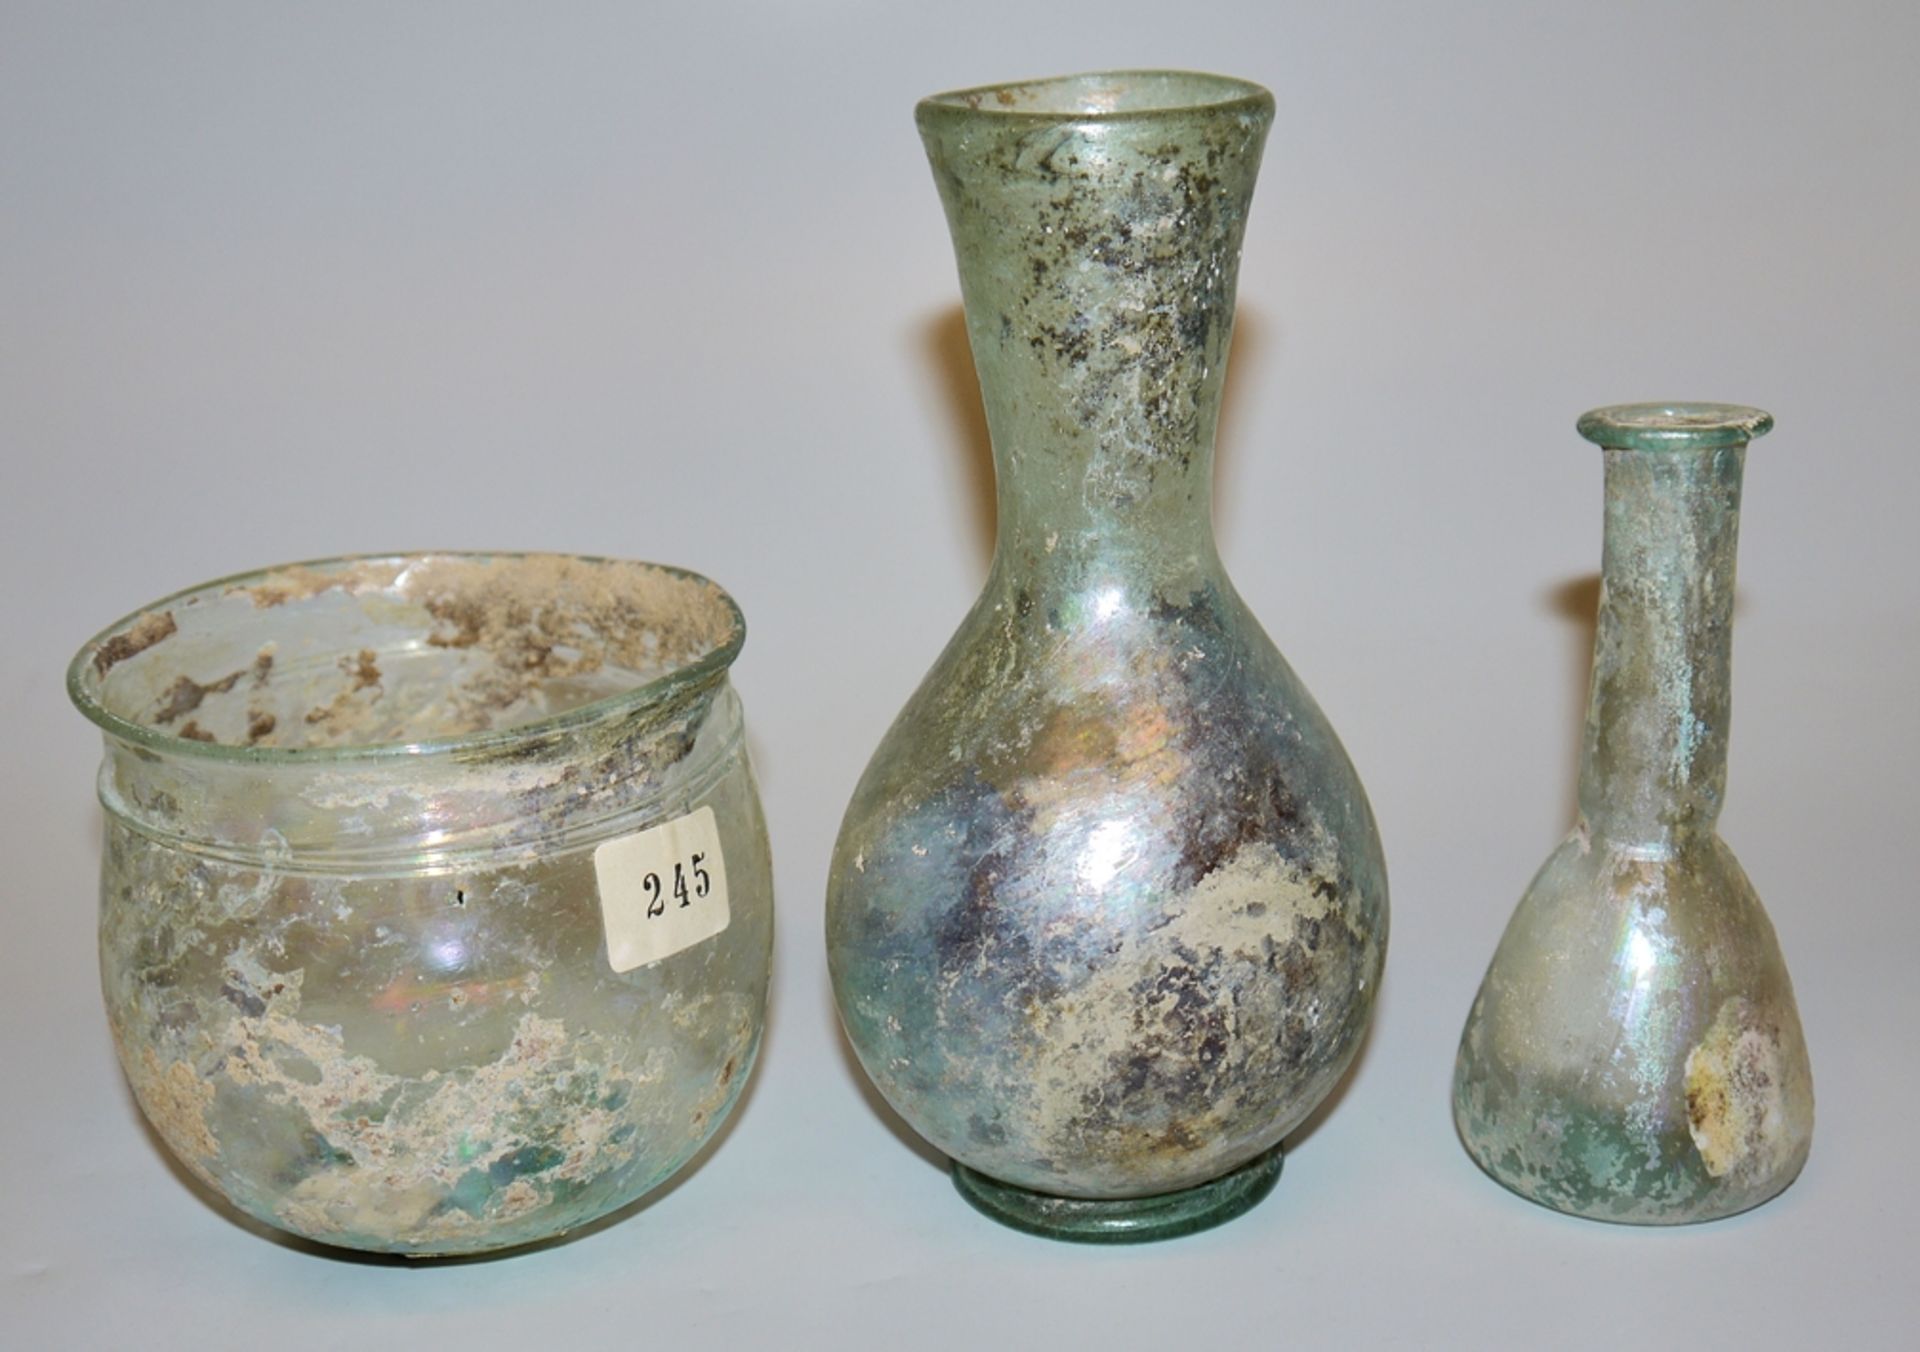 Six Roman jars, 1st-3rd century, from an old collection with family document - Image 3 of 3